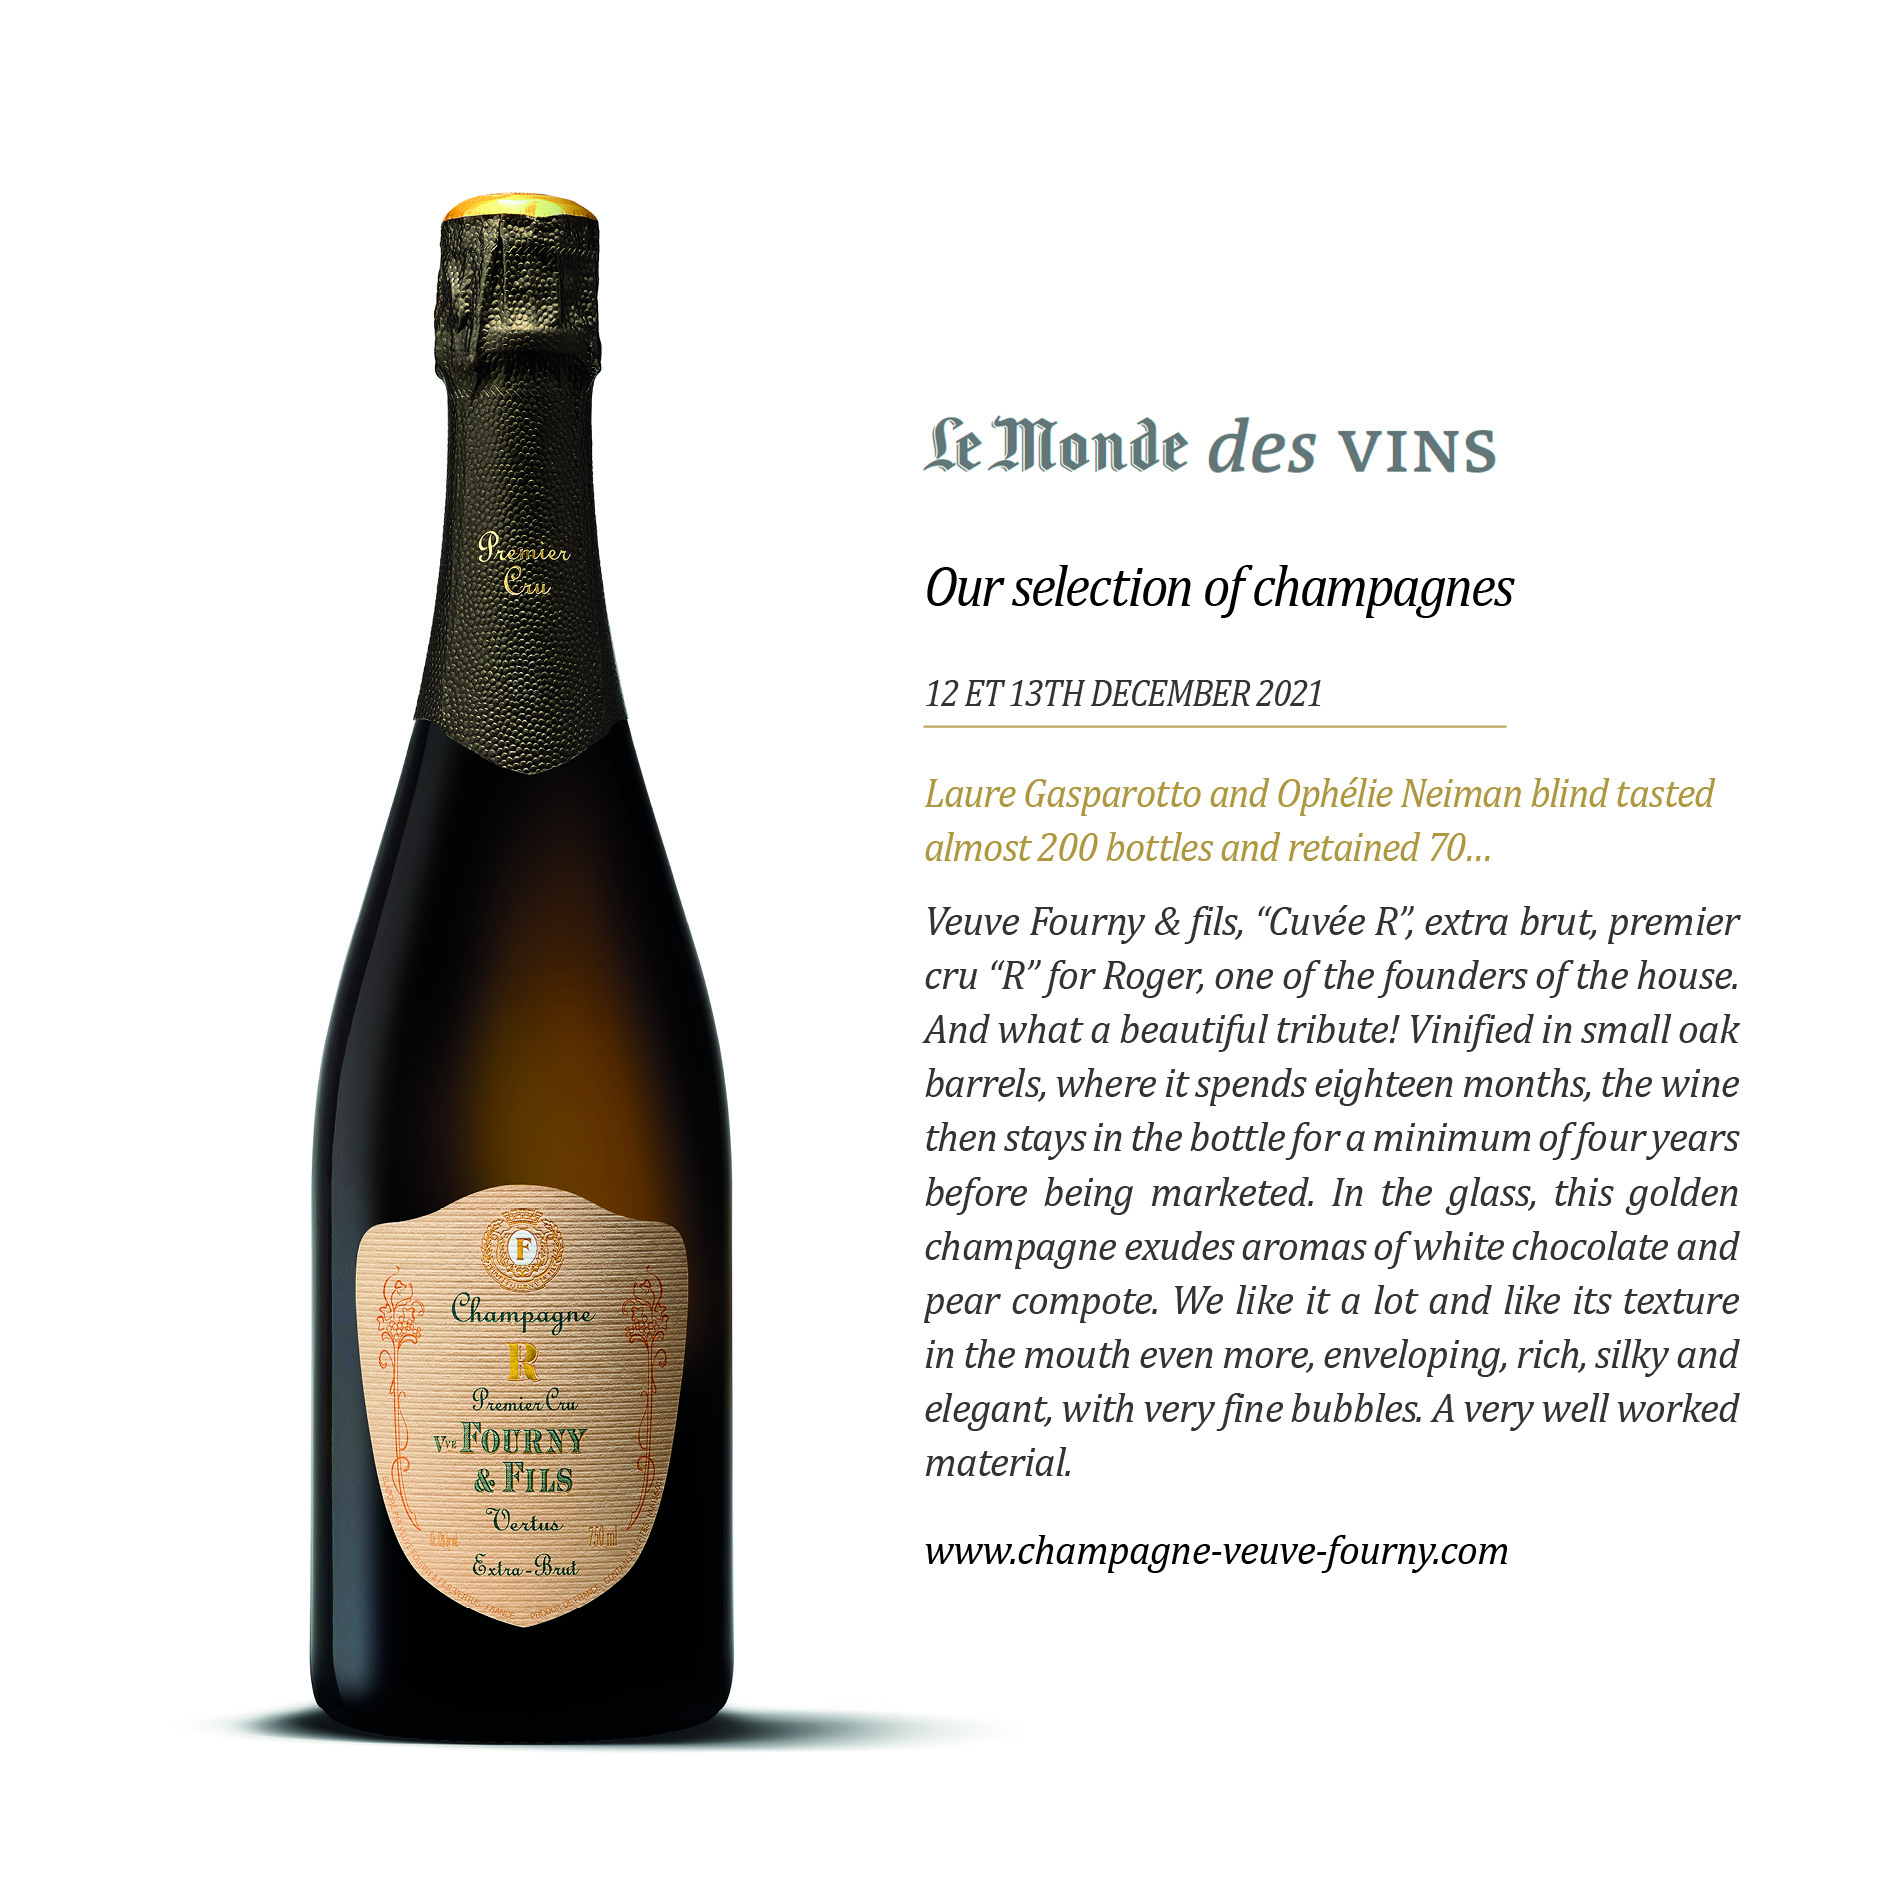 Our selection of champagnes - Le Monde